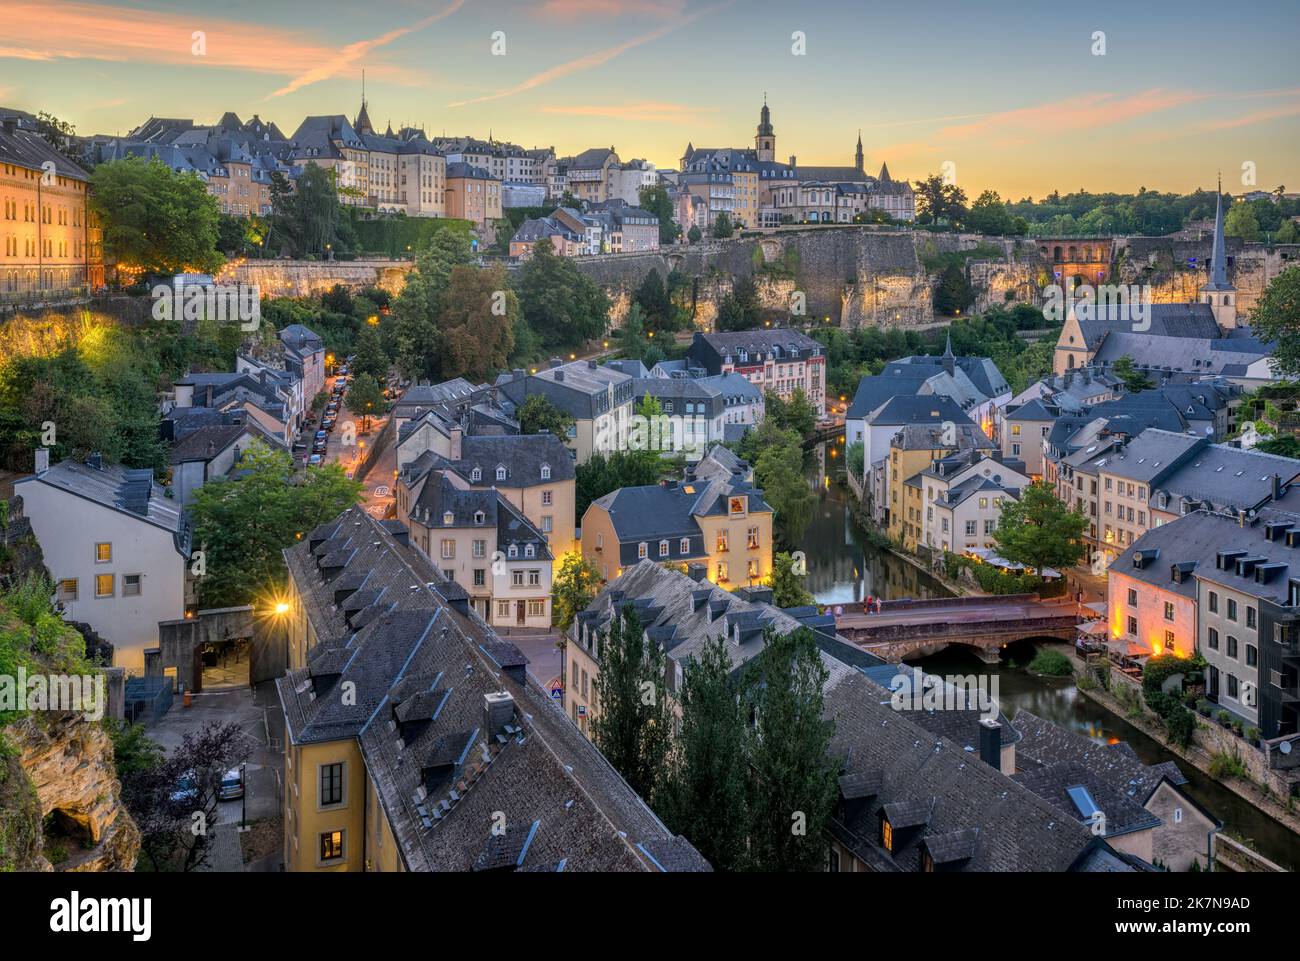 Luxembourg city, the capital of Grand Duchy of Luxembourg, view of the Old Town and Grund quarter on dramatic sunset Stock Photo